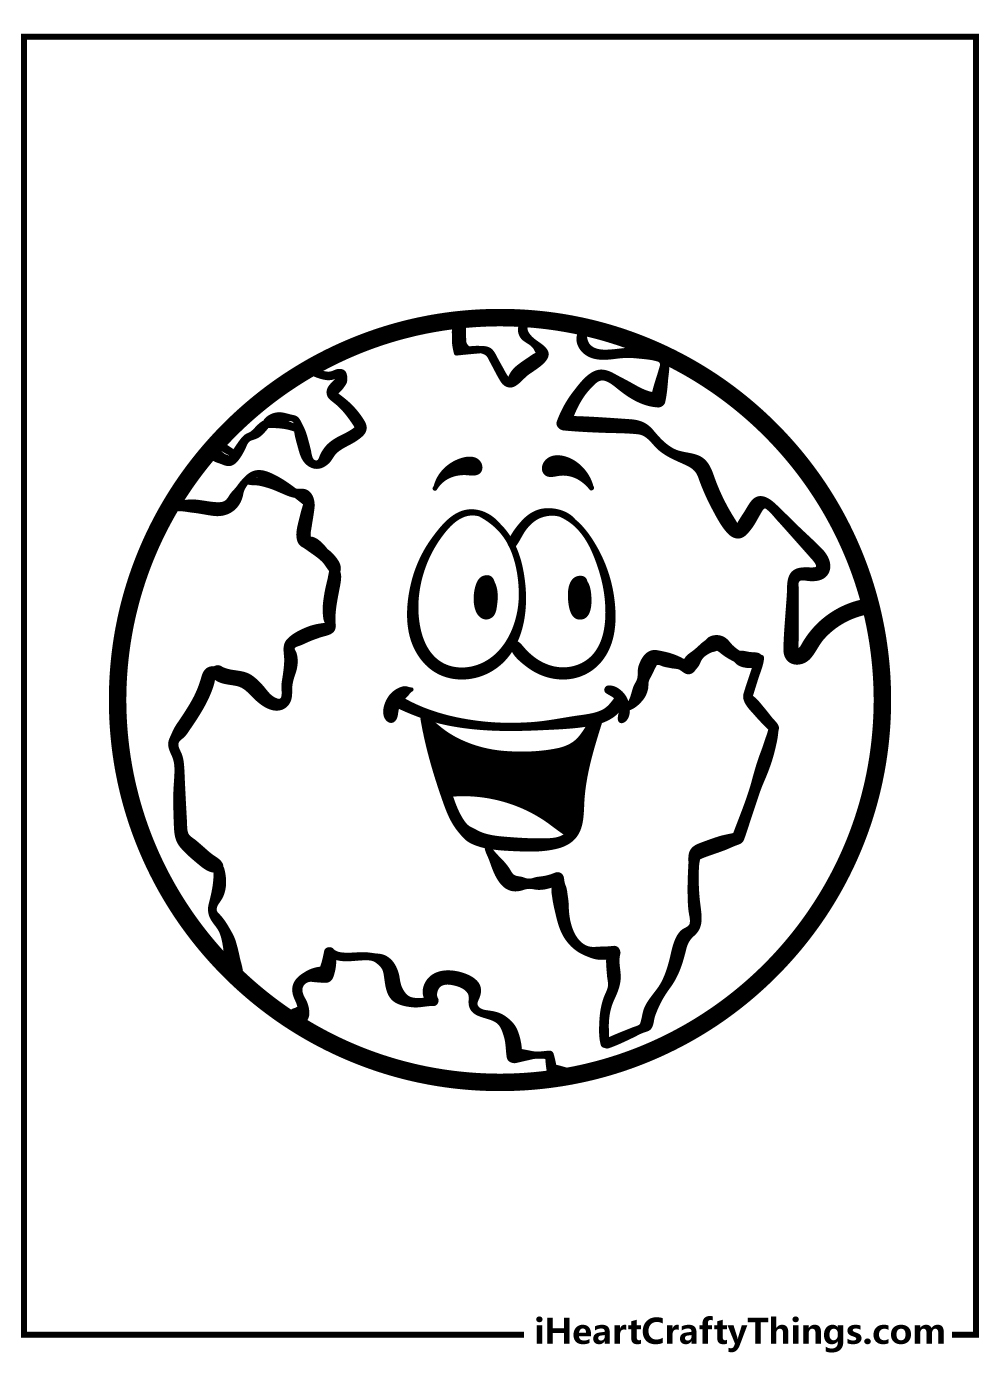 Earth Coloring Pages For Preschoolers